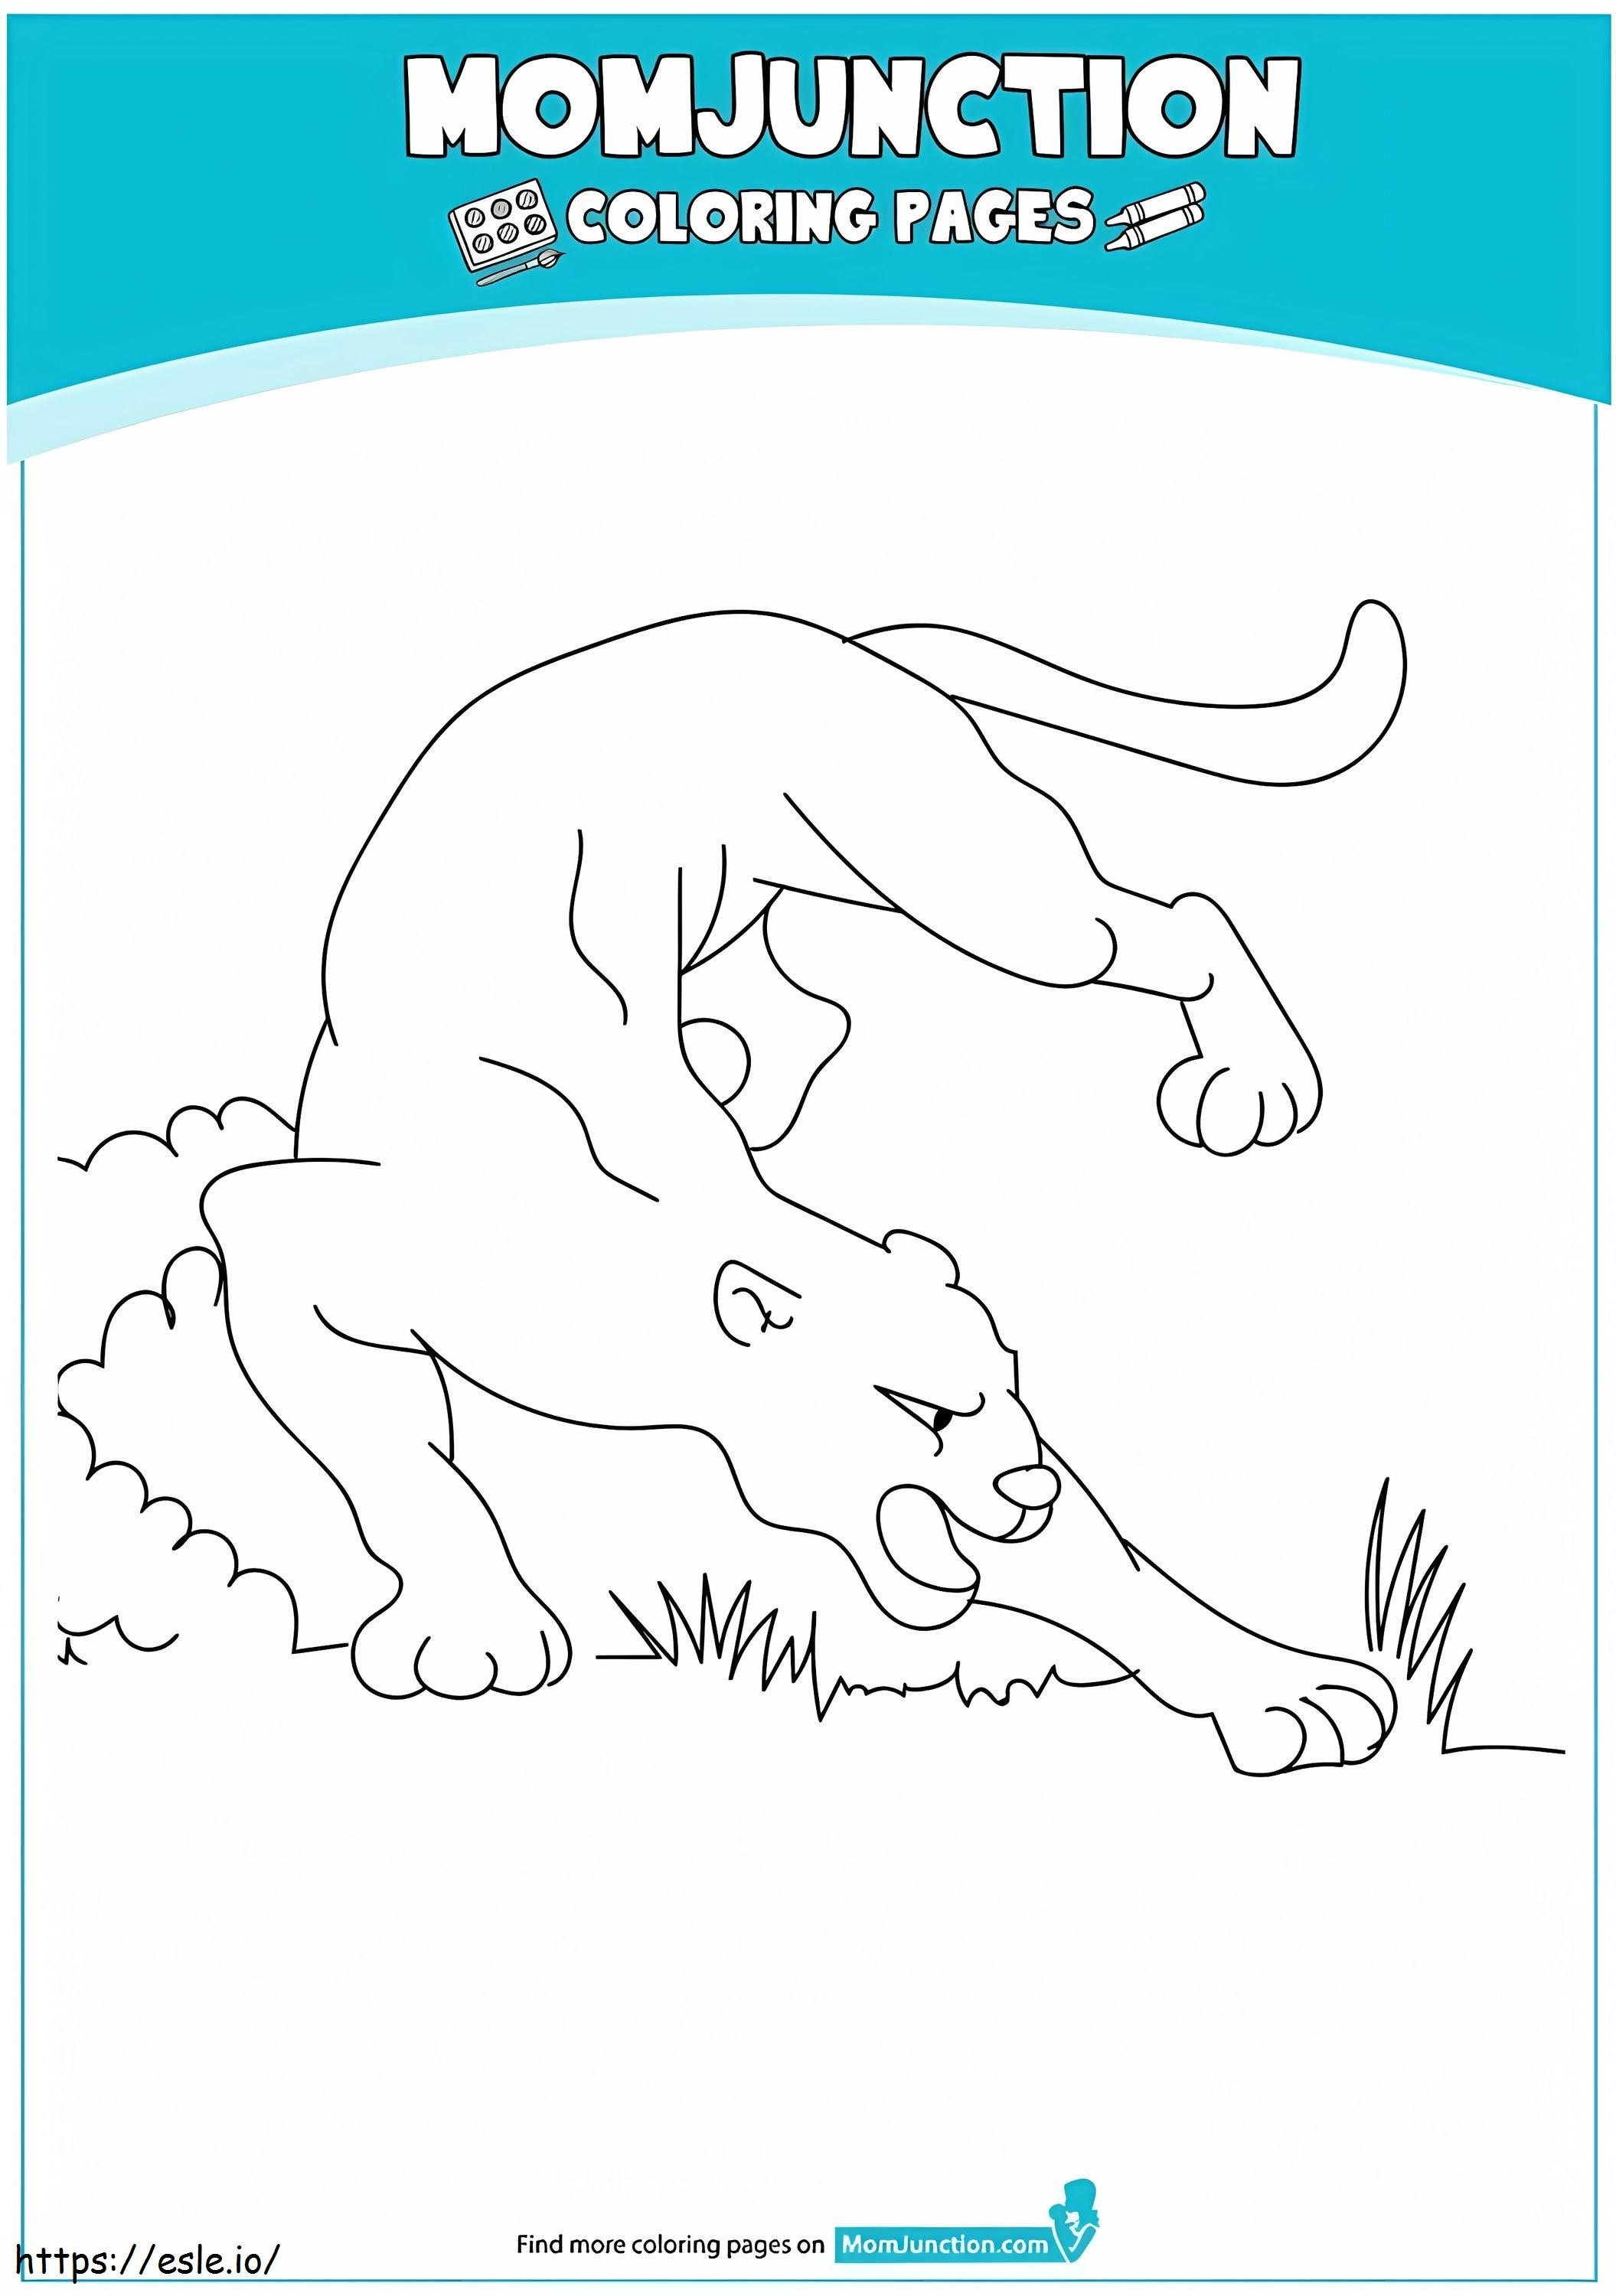 1526130296_Eastern Cougar 16 A4 coloring page